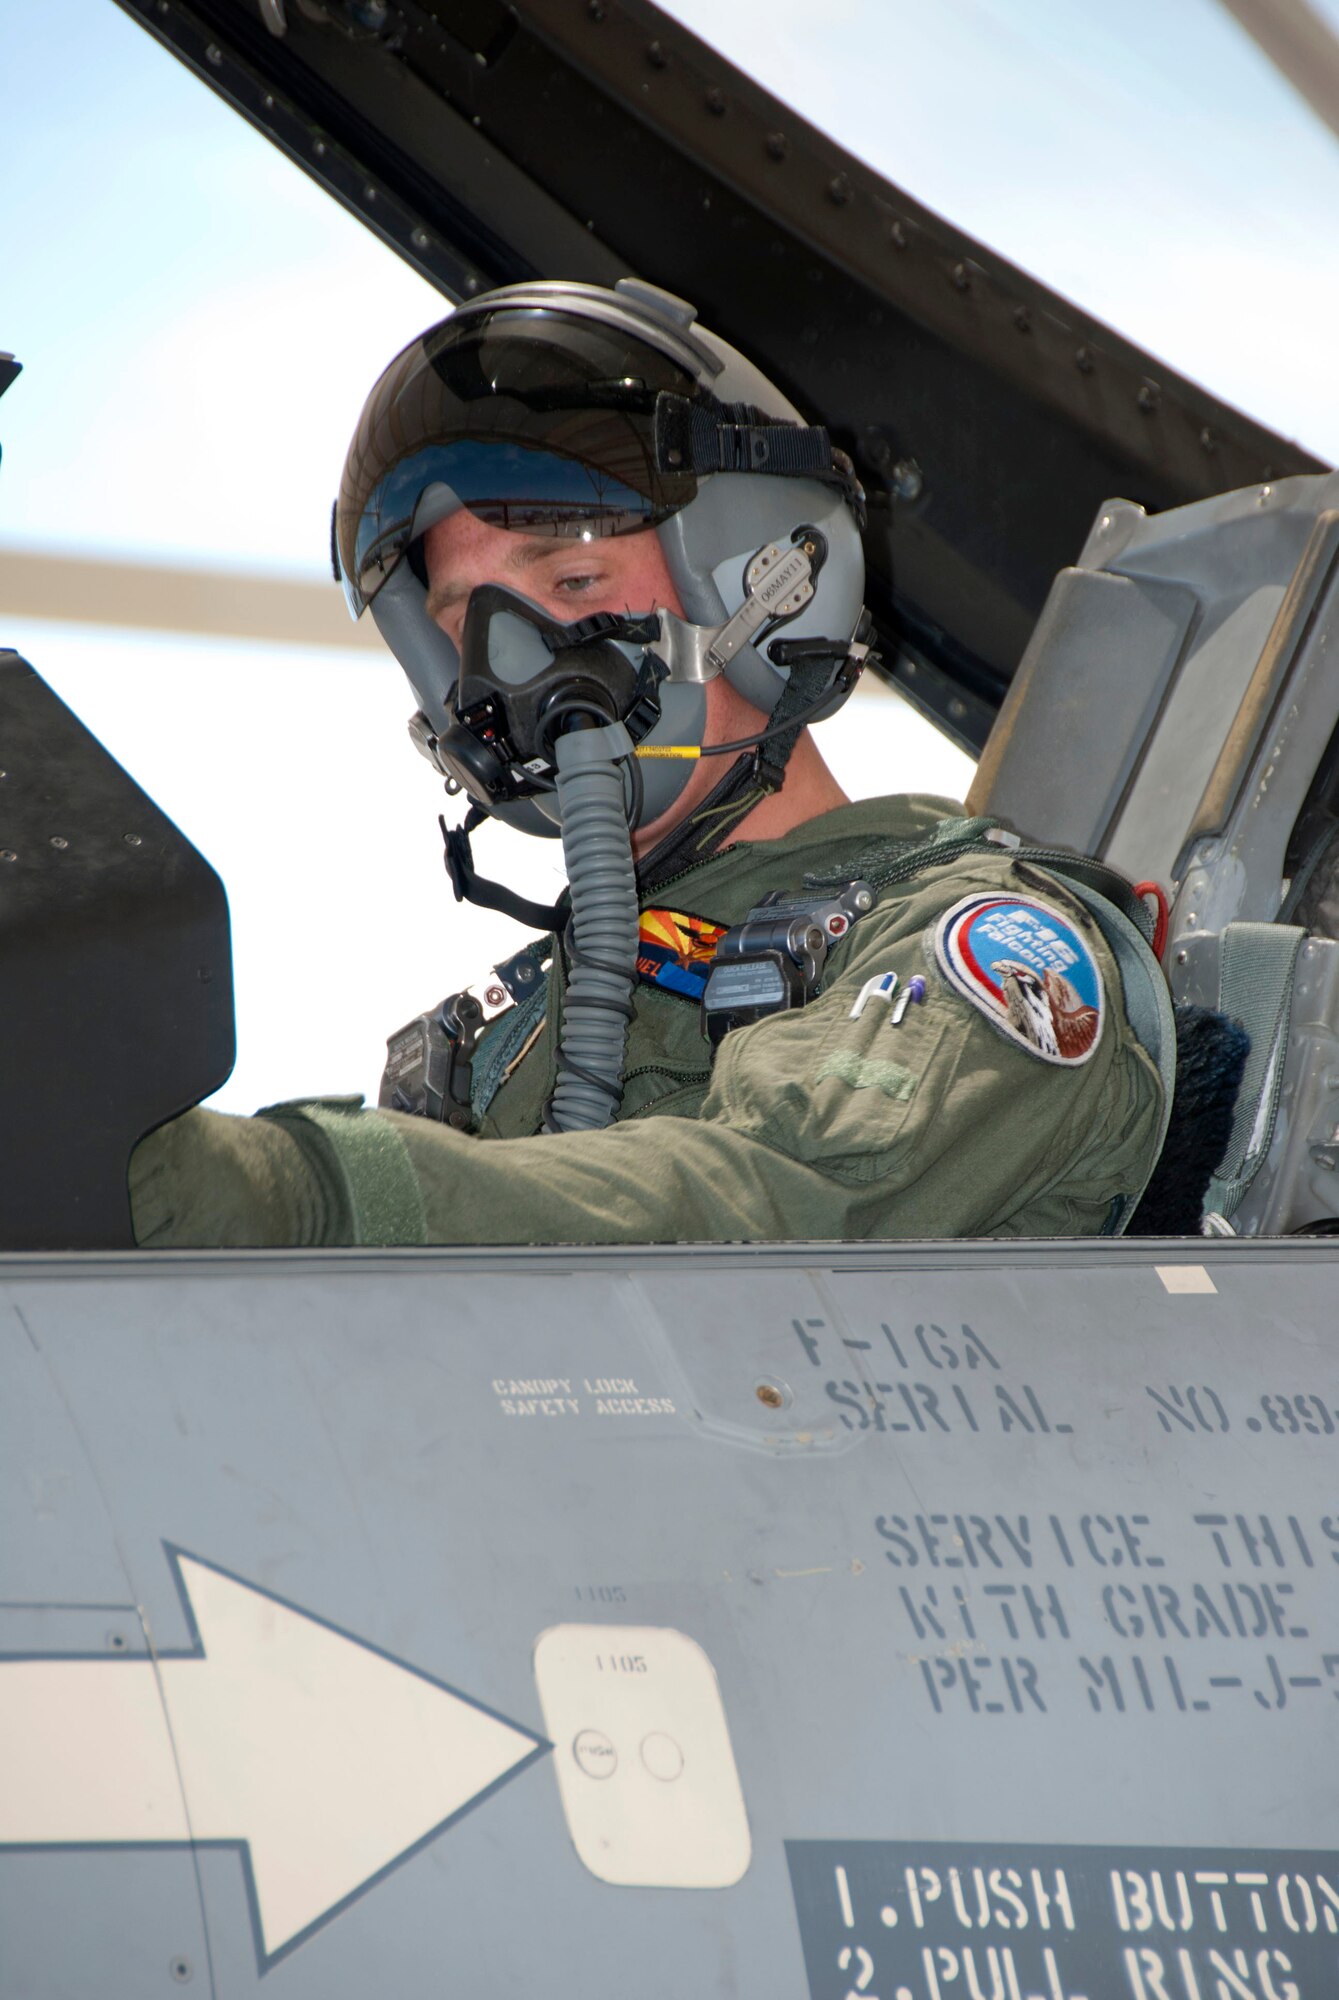 Lt. Daniel, a student F-16 pilot from the Royal Netherlands Air Force, prepares for a training flight on the 162nd Fighter Wing flightline, April 28. He’s one of the first Dutch students to train in Tucson since the RNLAF program was re-introduced at the wing in January. The Dutch previously trained with the wing from 1989 through 2007. Lt. Daniel’s last name is omitted for security purposes. (U.S. Air Force photo/Master Sgt. Dave Neve)